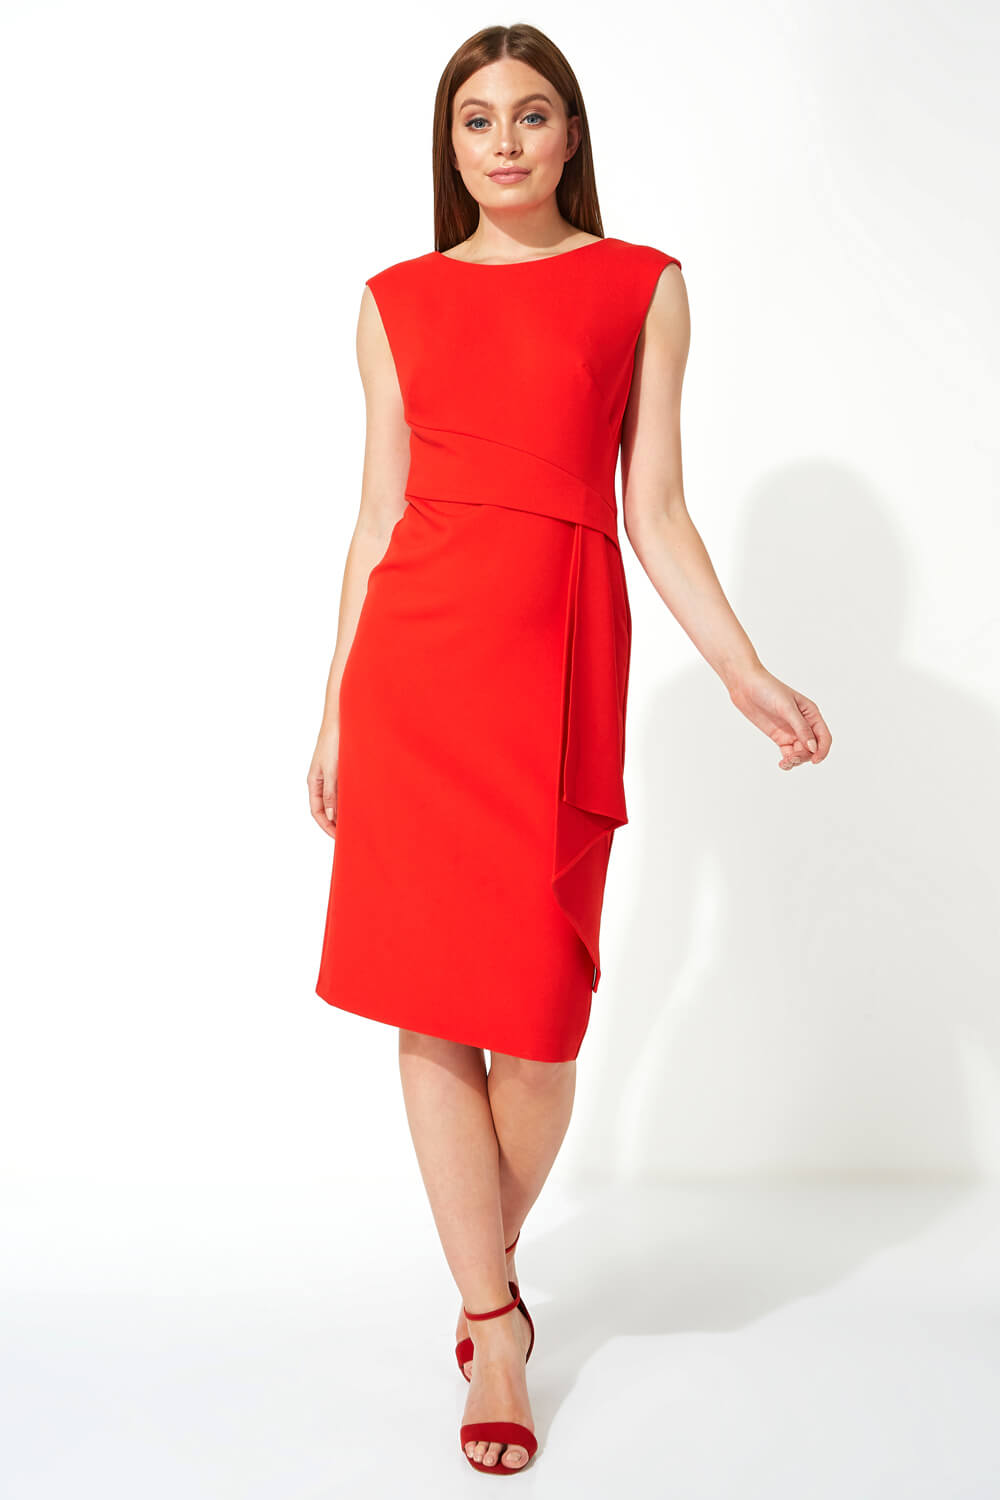 Red Ruched Waist Cocktail Dress, Image 2 of 5